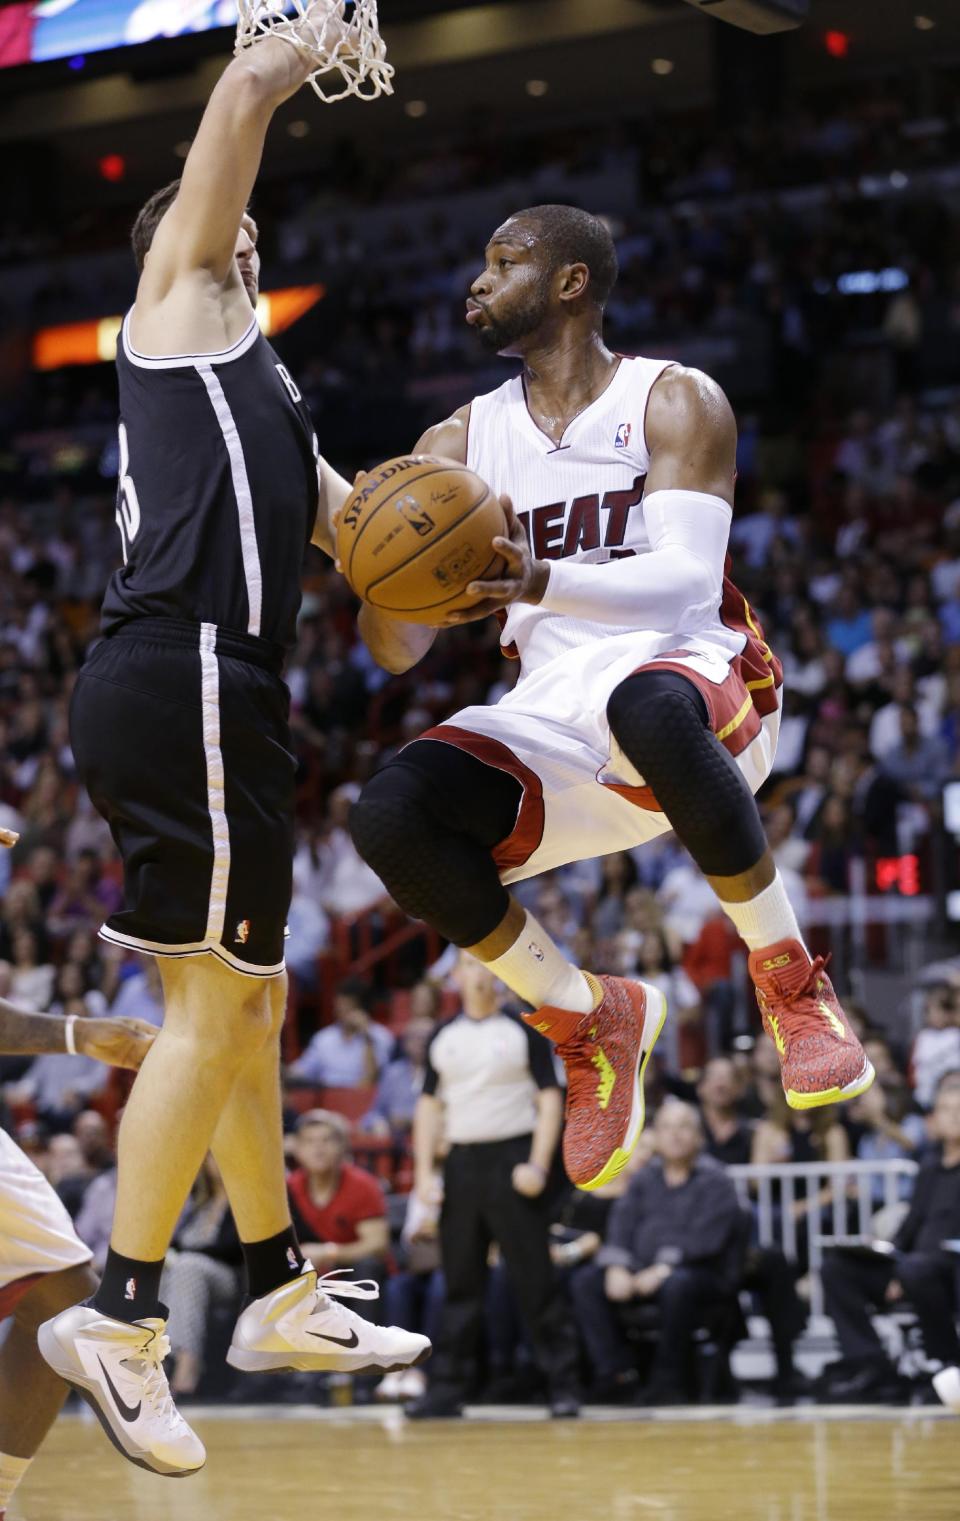 Miami Heat guard Dwyane Wade, center, looks for an open teammate as he is guarded by Brooklyn Nets forward Mirza Teletovic, of Bosnia, during the first half of an NBA basketball game, Wednesday, March 12, 2014, in Miami. (AP Photo/Wilfredo Lee)